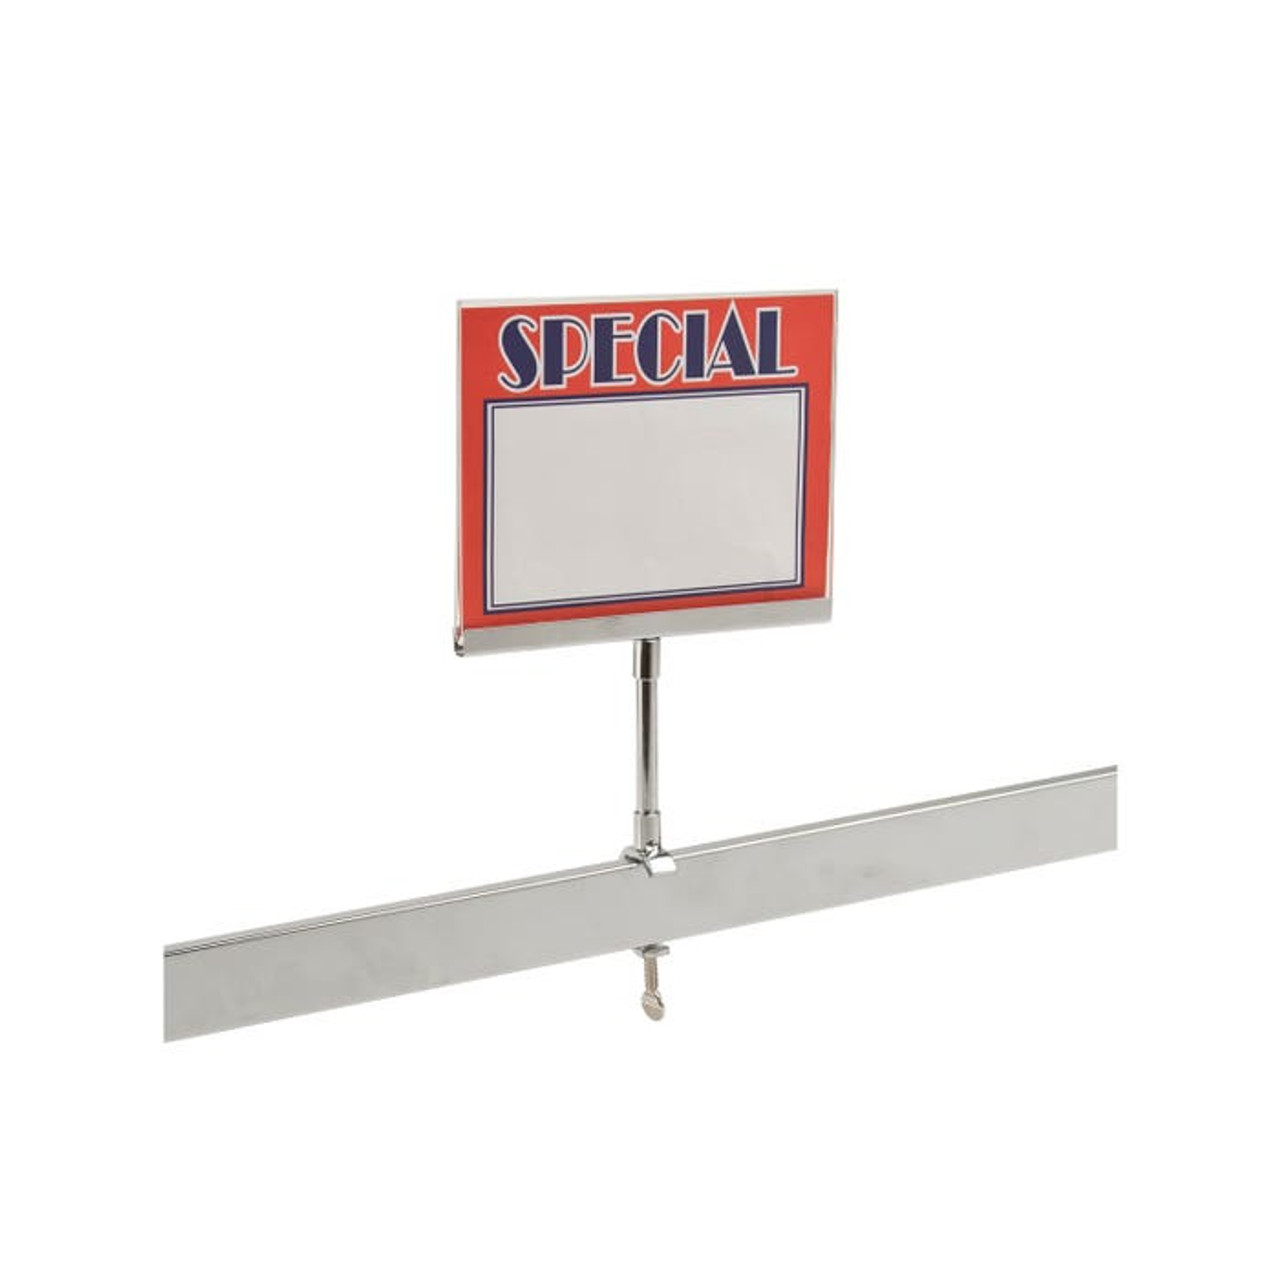 Retail Sign clamp -  3/8" Threaded Hole